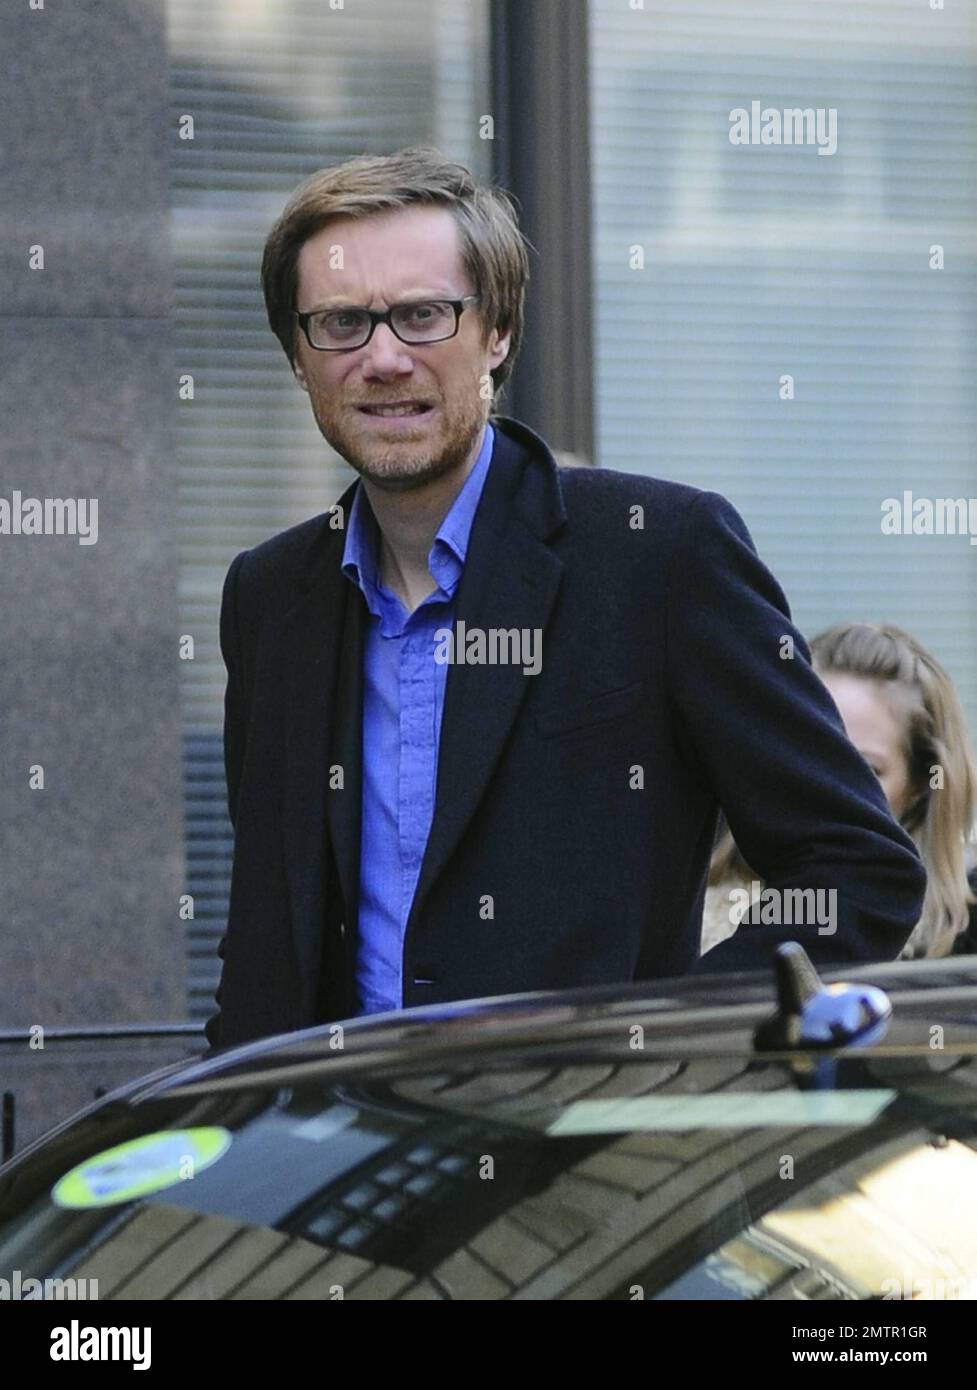 British writer, director, radio presenter and comic actor Stephen Merchant  spends time with a friend out and about in London, UK. 3/7/11 Stock Photo -  Alamy